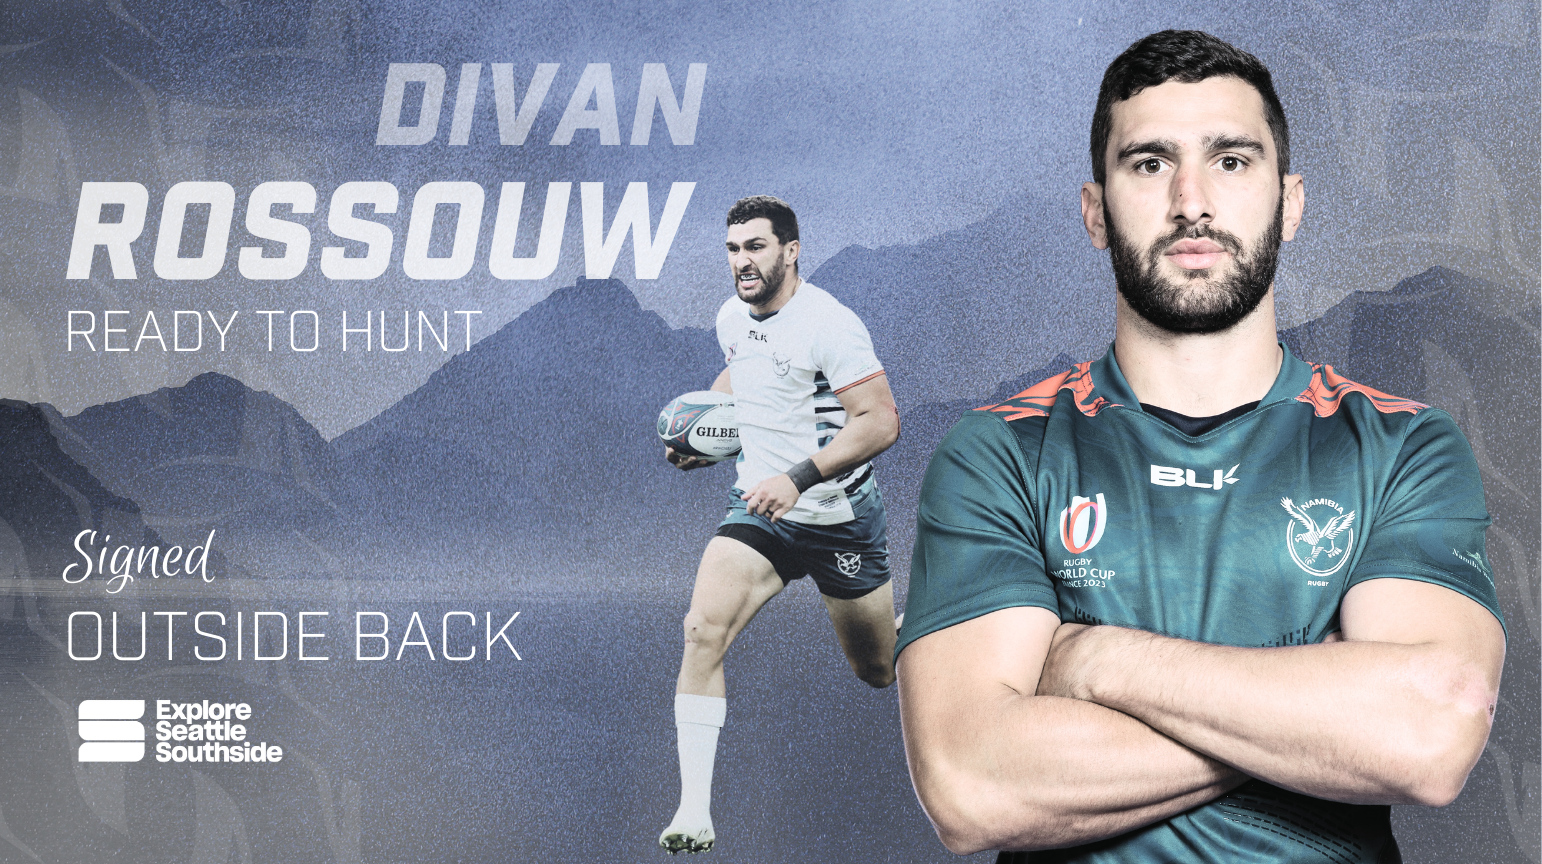 WORLD CUP TO THE SEAWOLVES, DIVAN ROSSOUW OF NAMIBIA JOINS THE SEAWOLVES POD